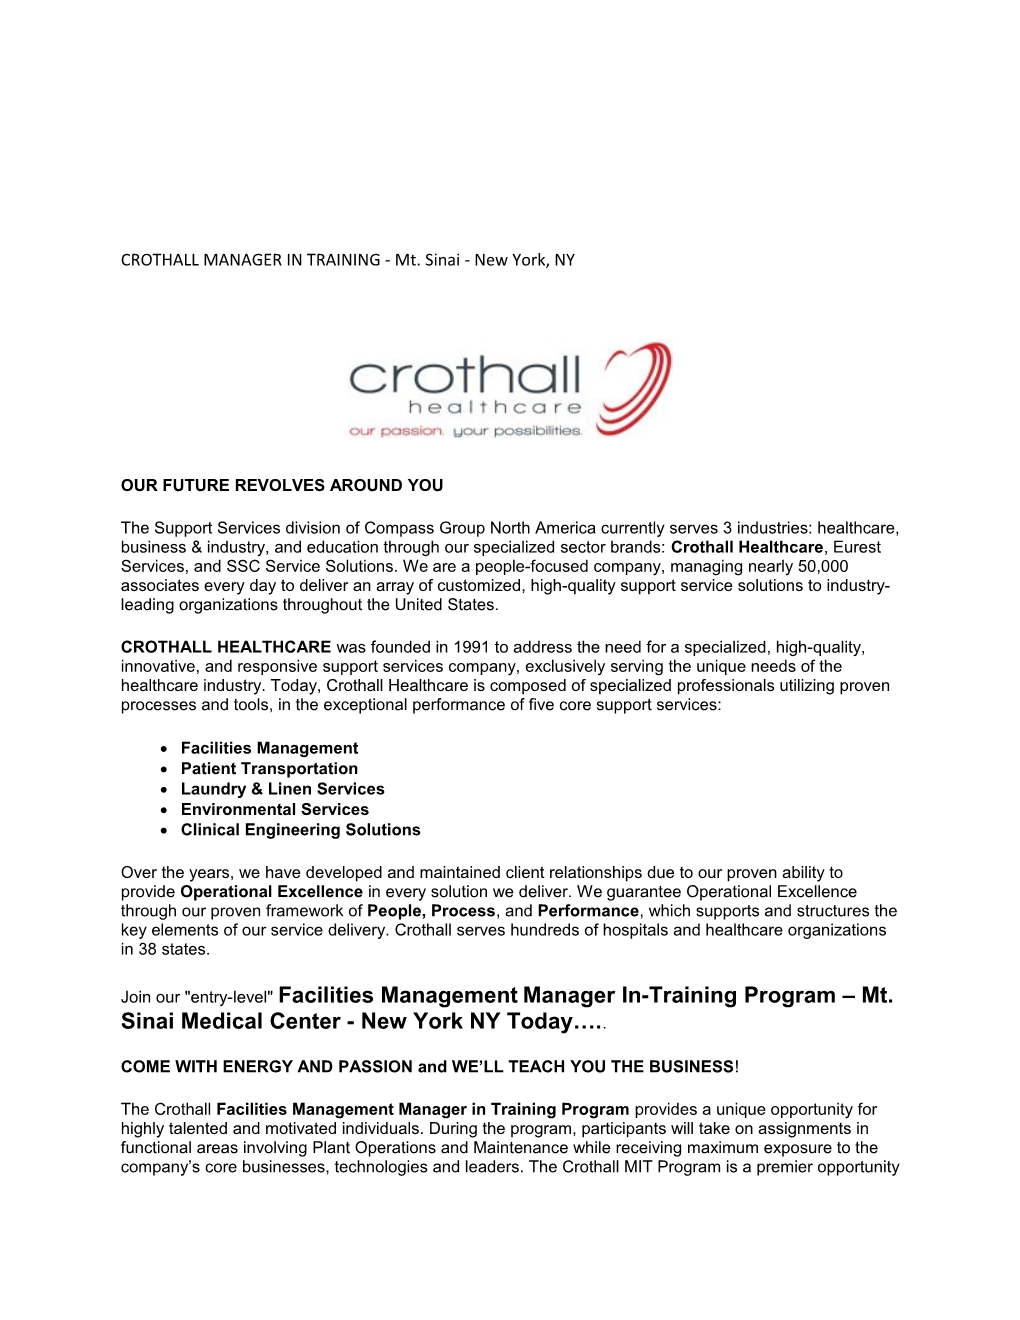 CROTHALL MANAGER in TRAINING - Mt. Sinai - New York, NY